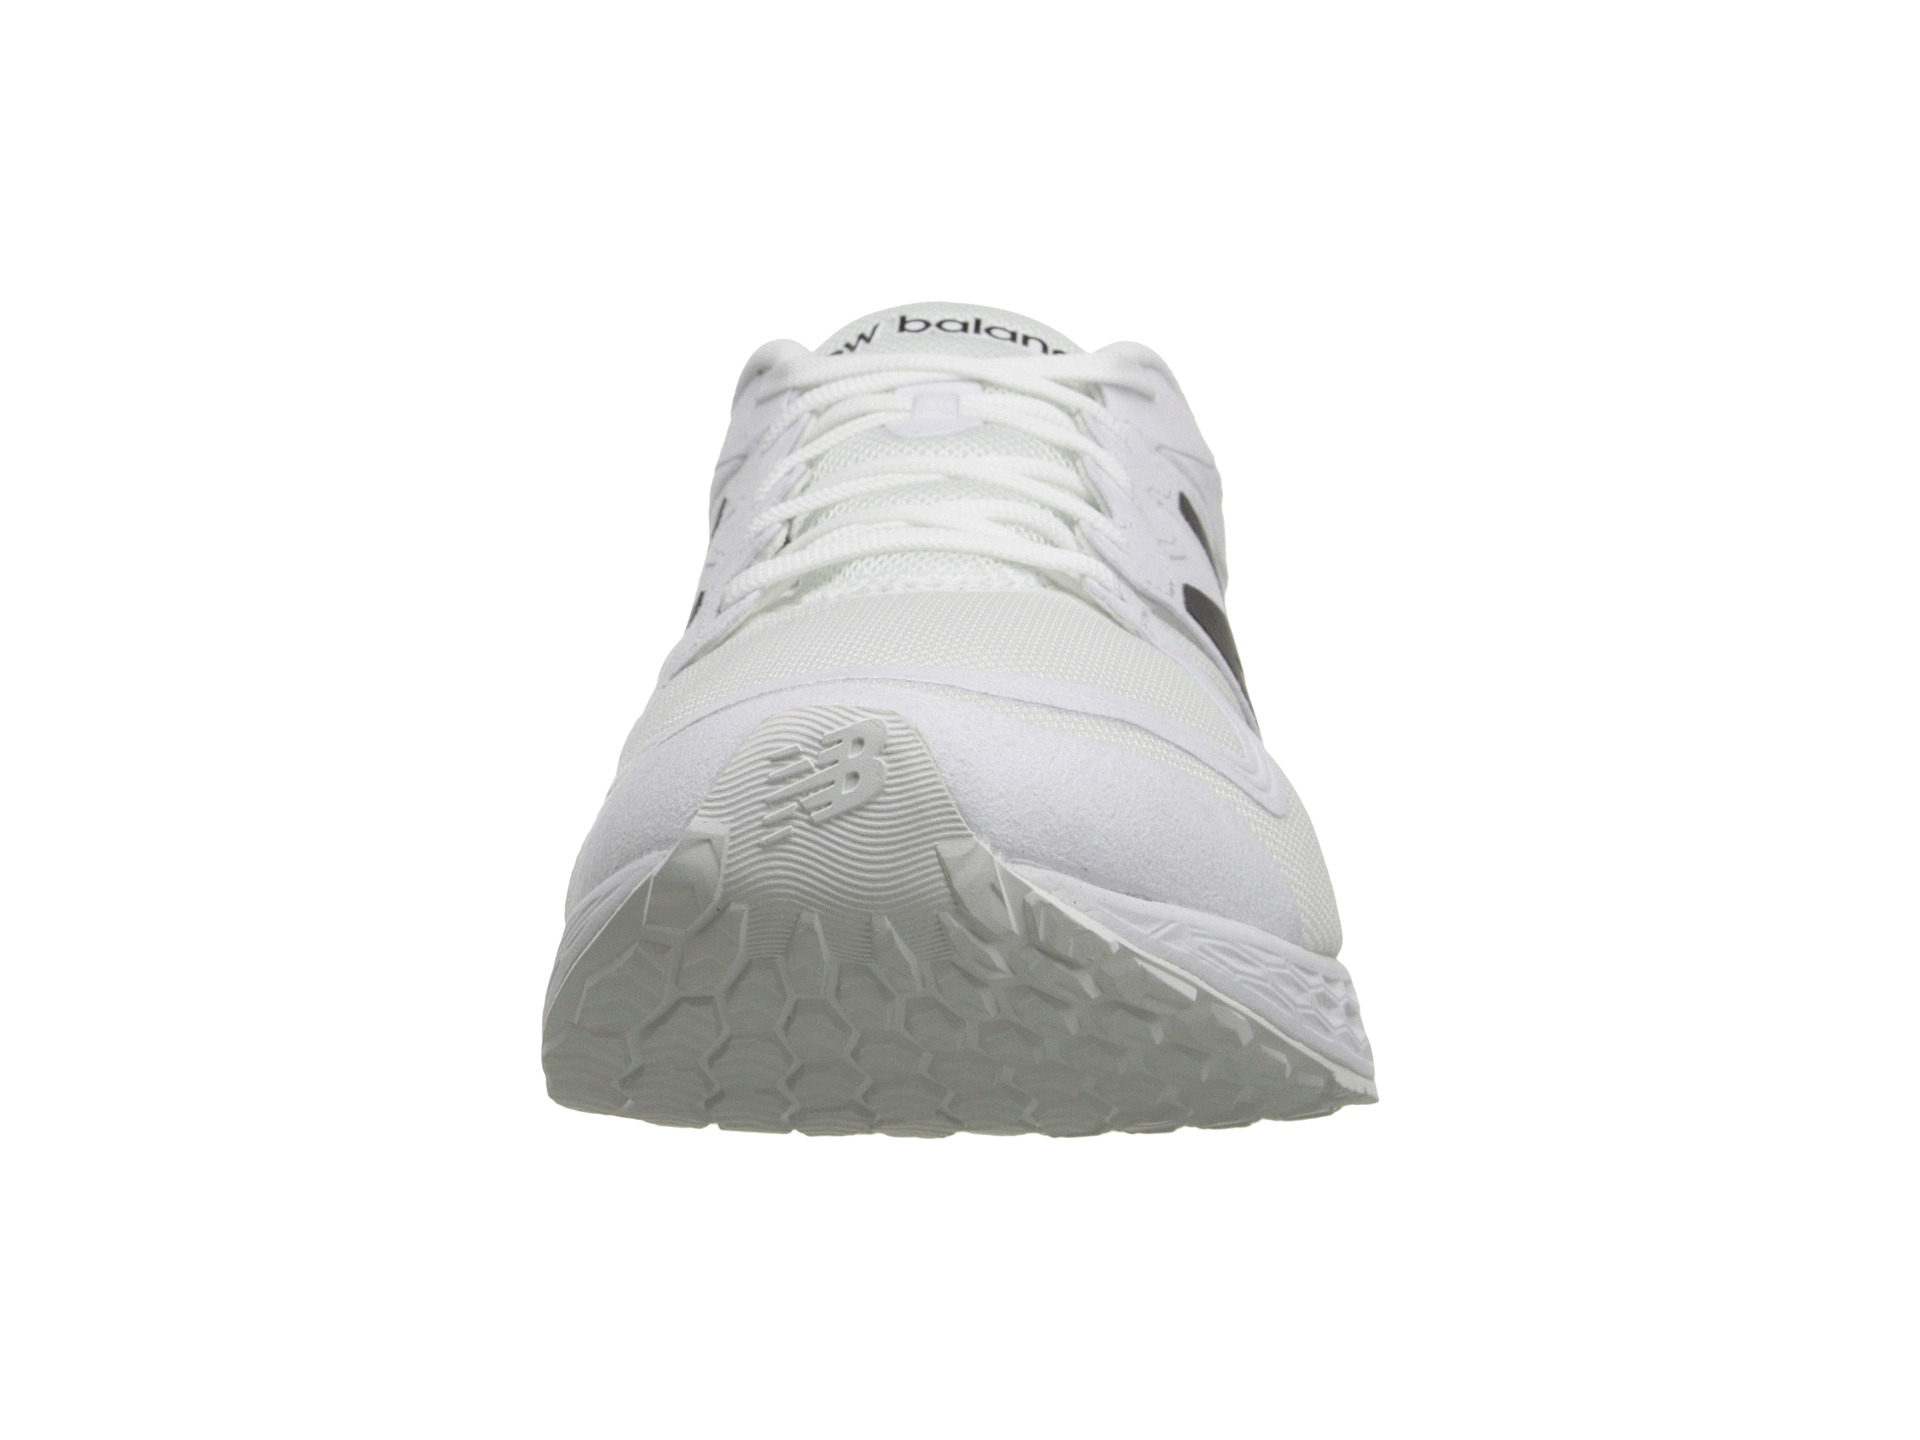 New Balance Leather Ml1980 in White for Men - Lyst